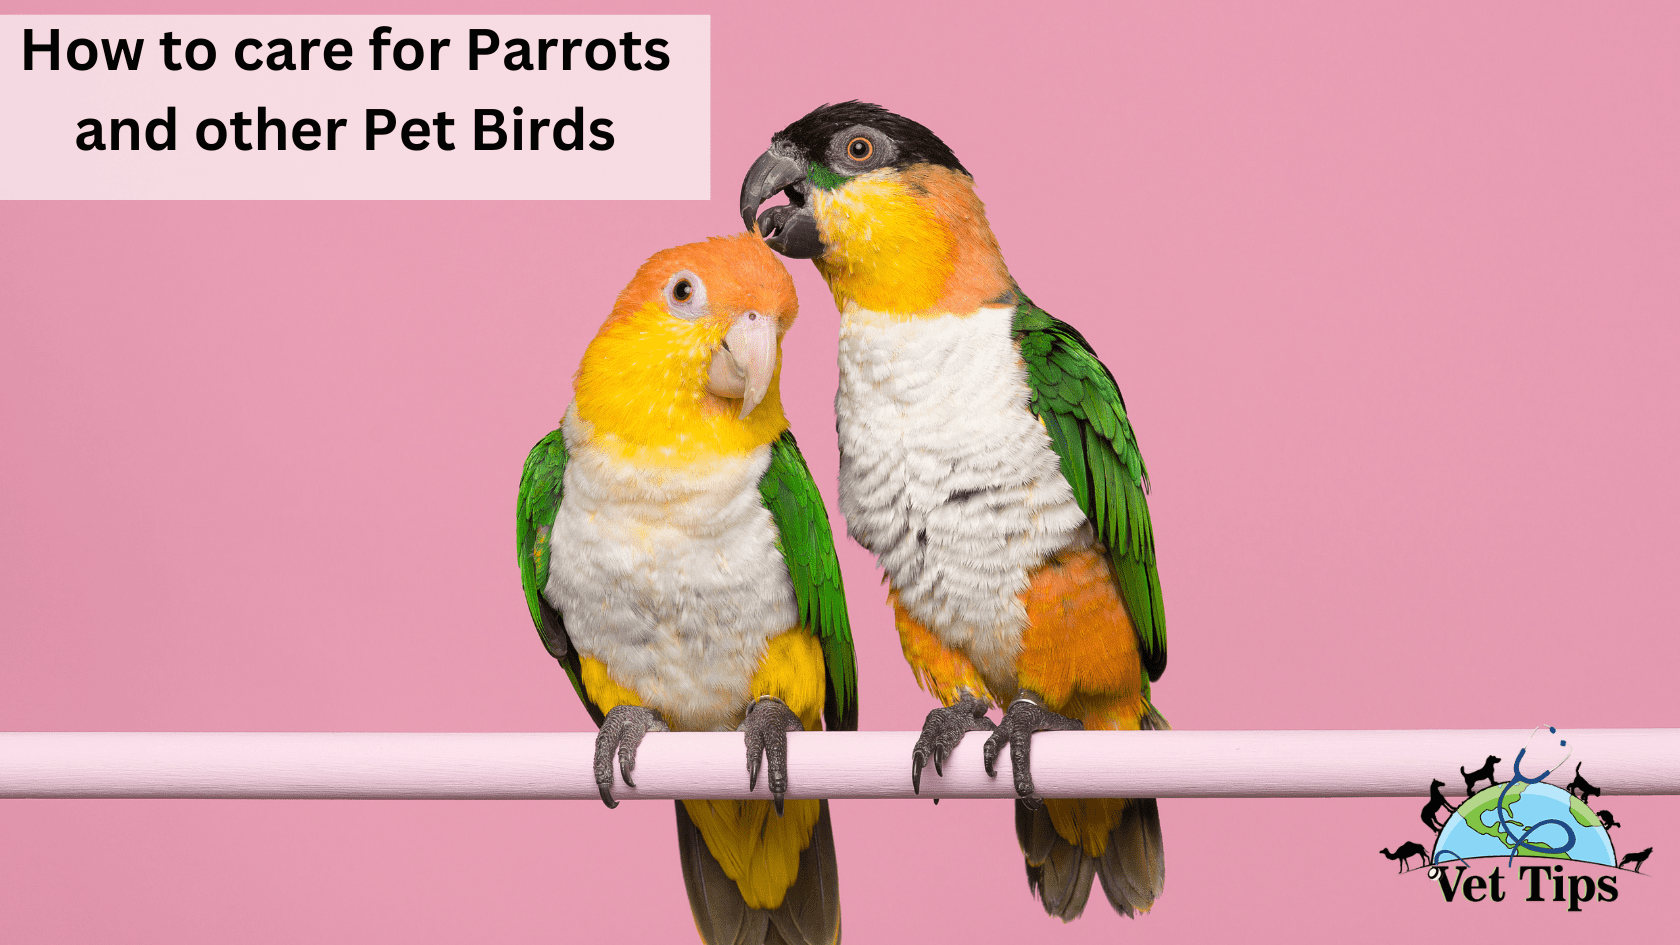 How to care for Parrots and other Pet Birds